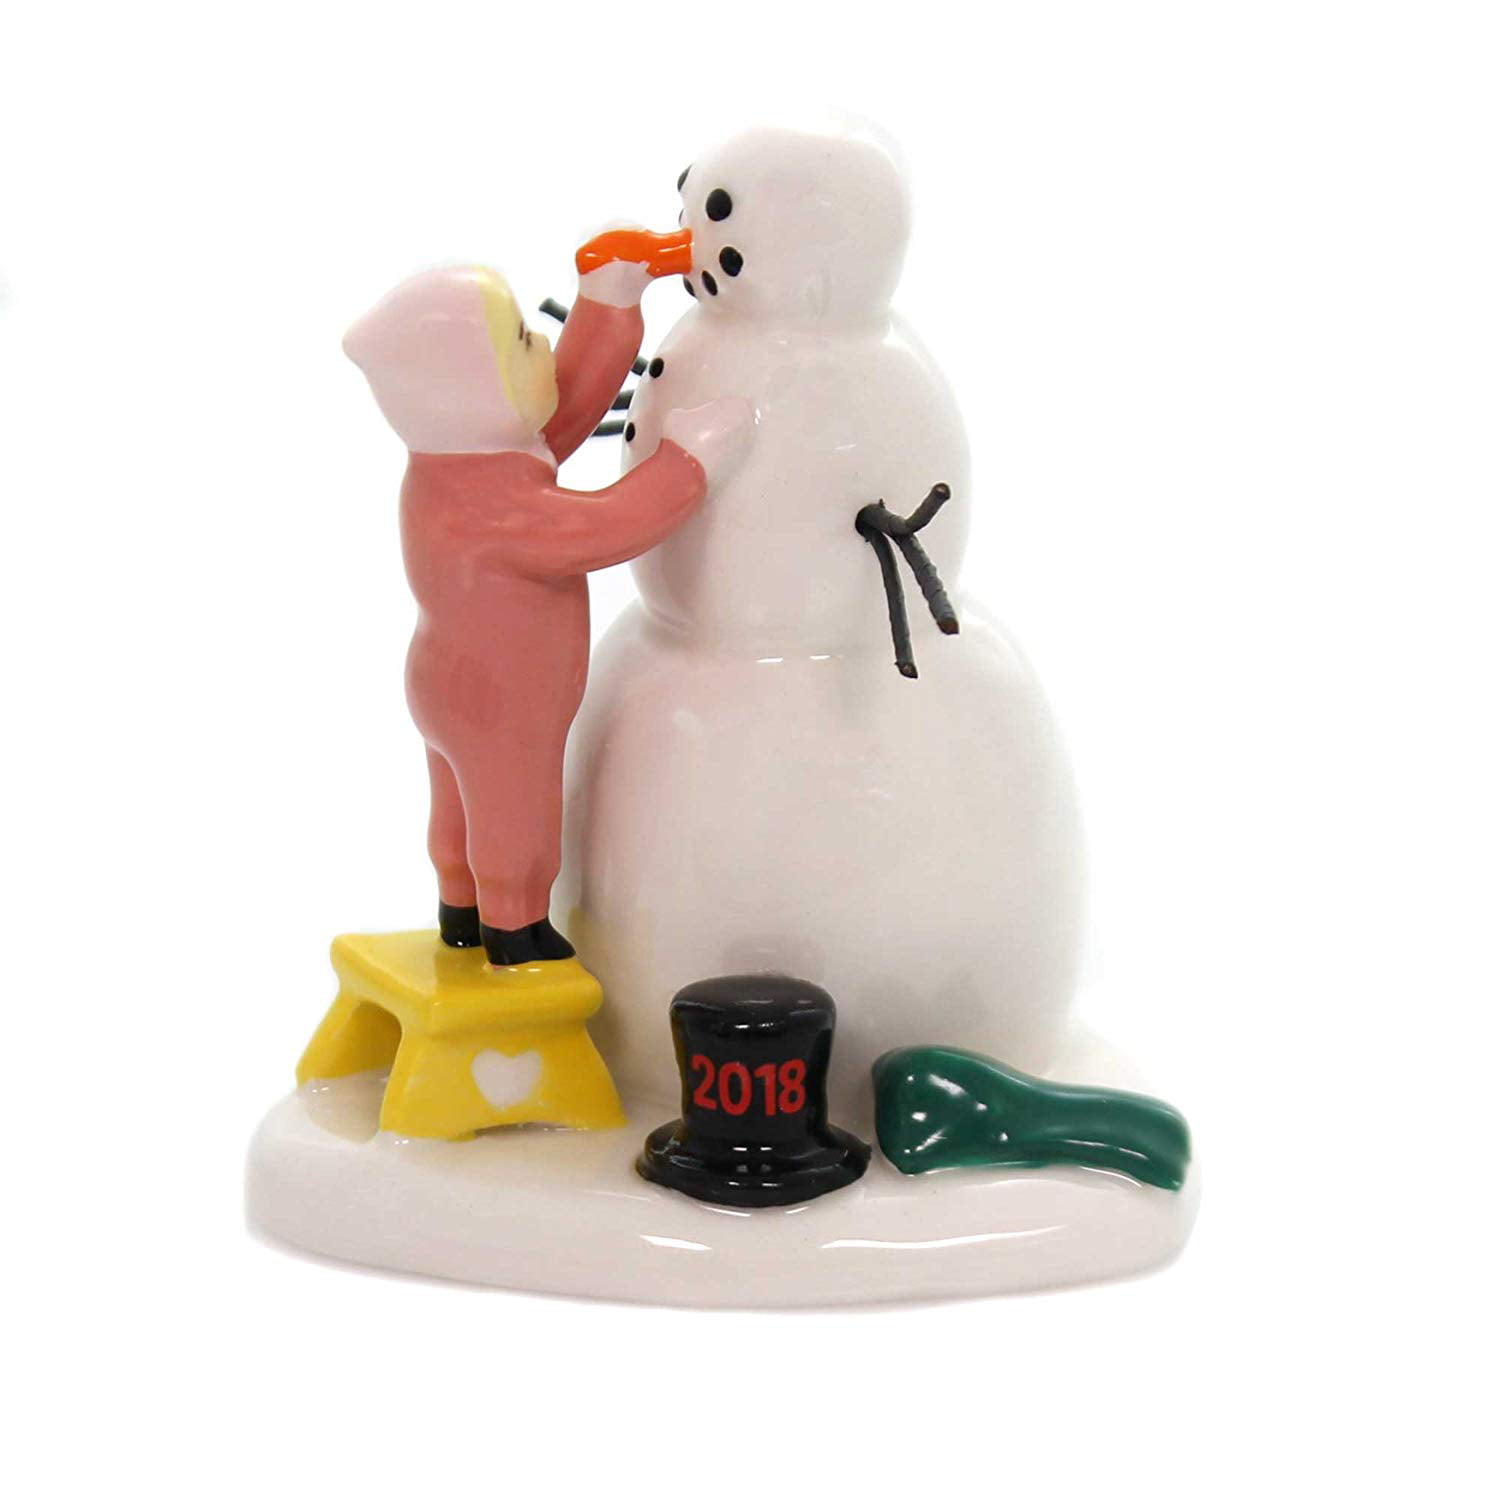 Department 56 Accessories for Villages Lucky The Snowman Accessory Figurine 